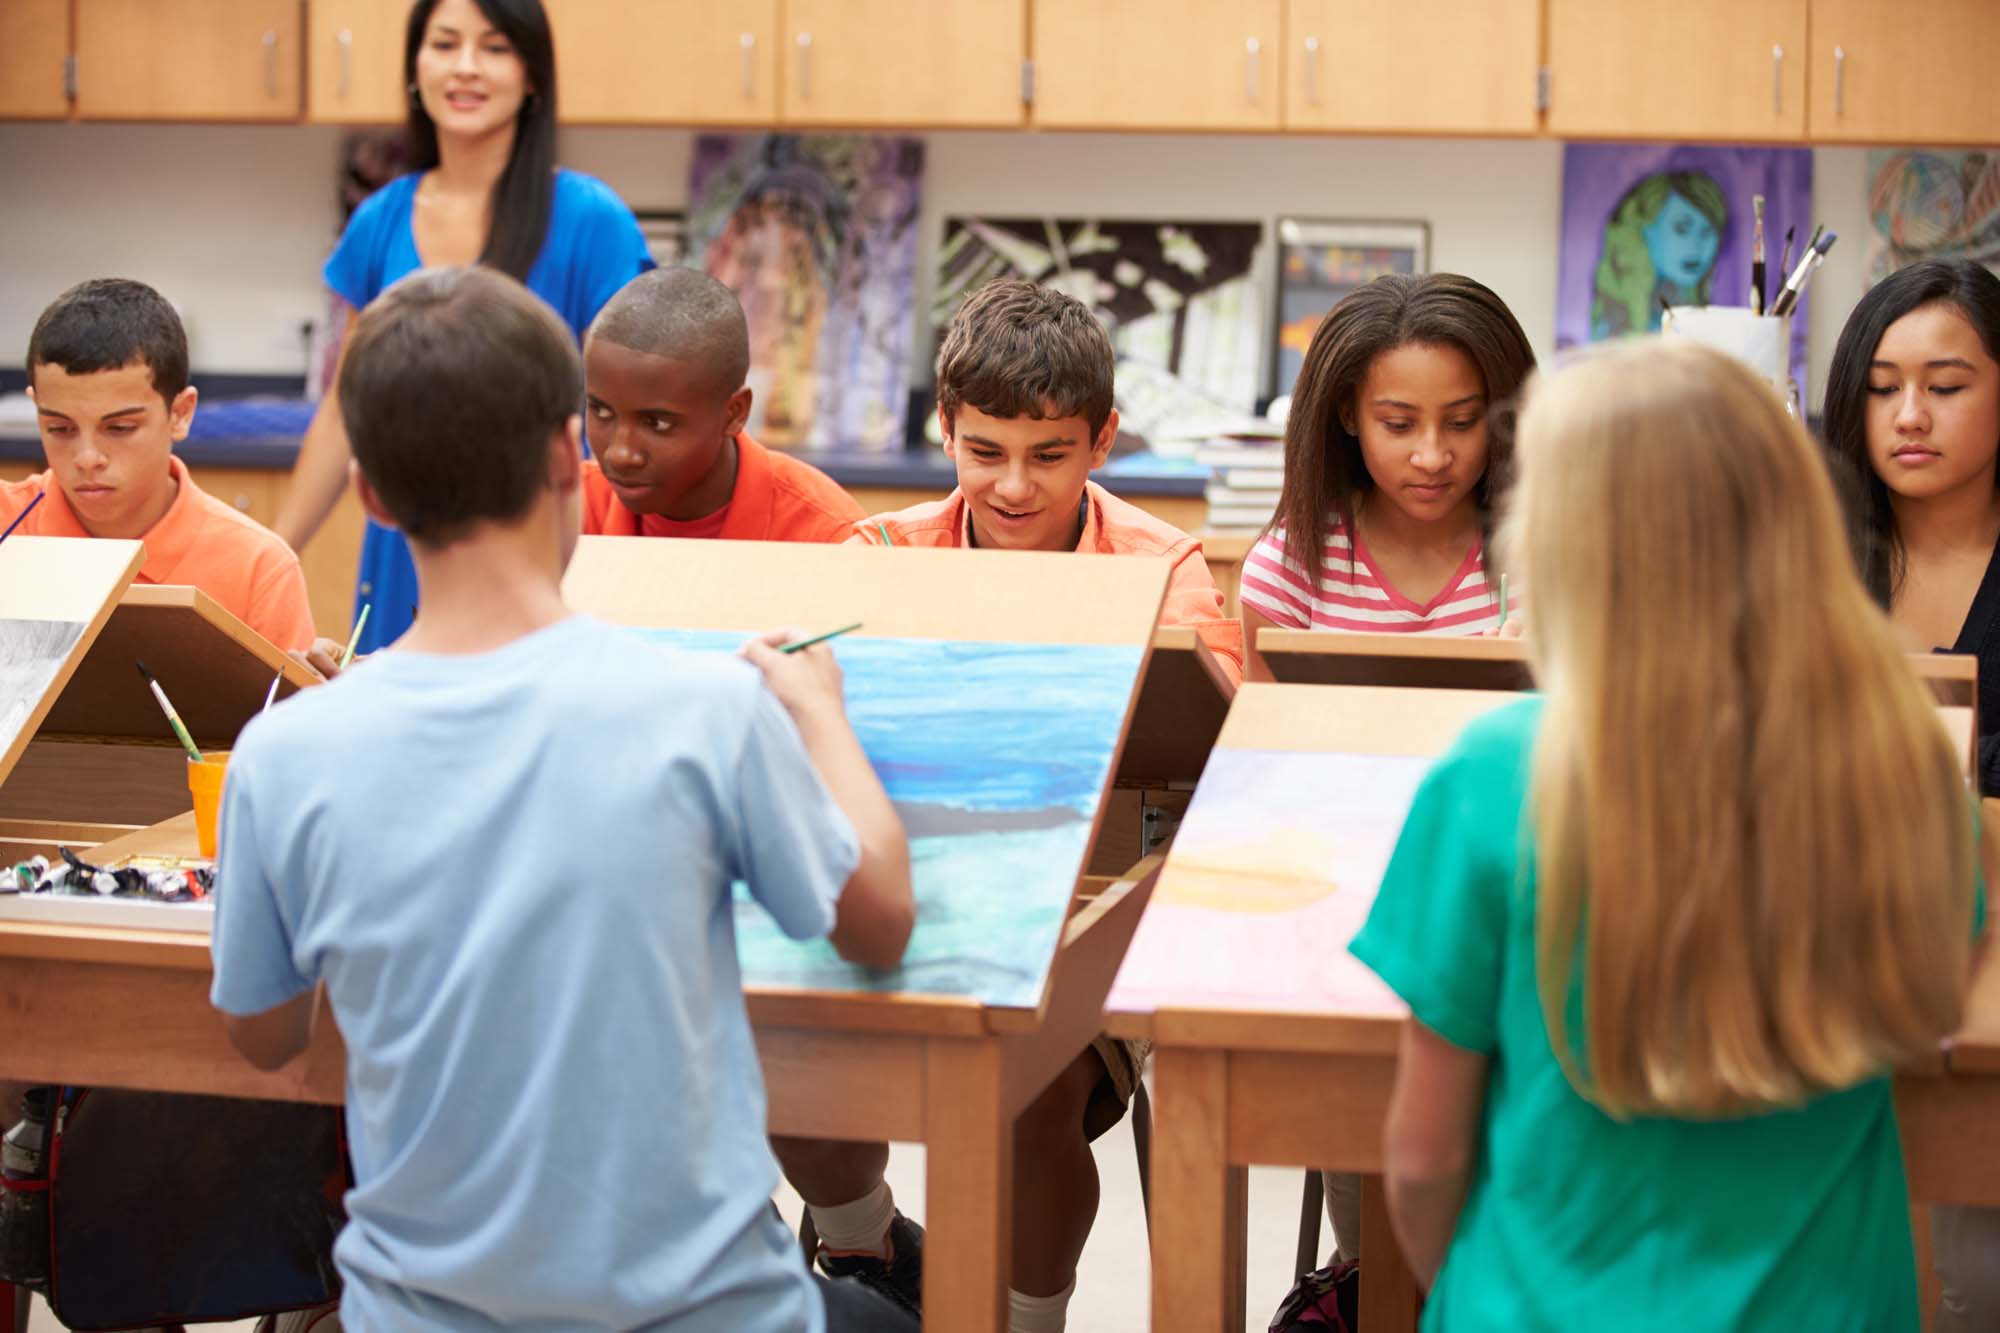 An art instructor provides guidance to a student standing at an easel in a classroom